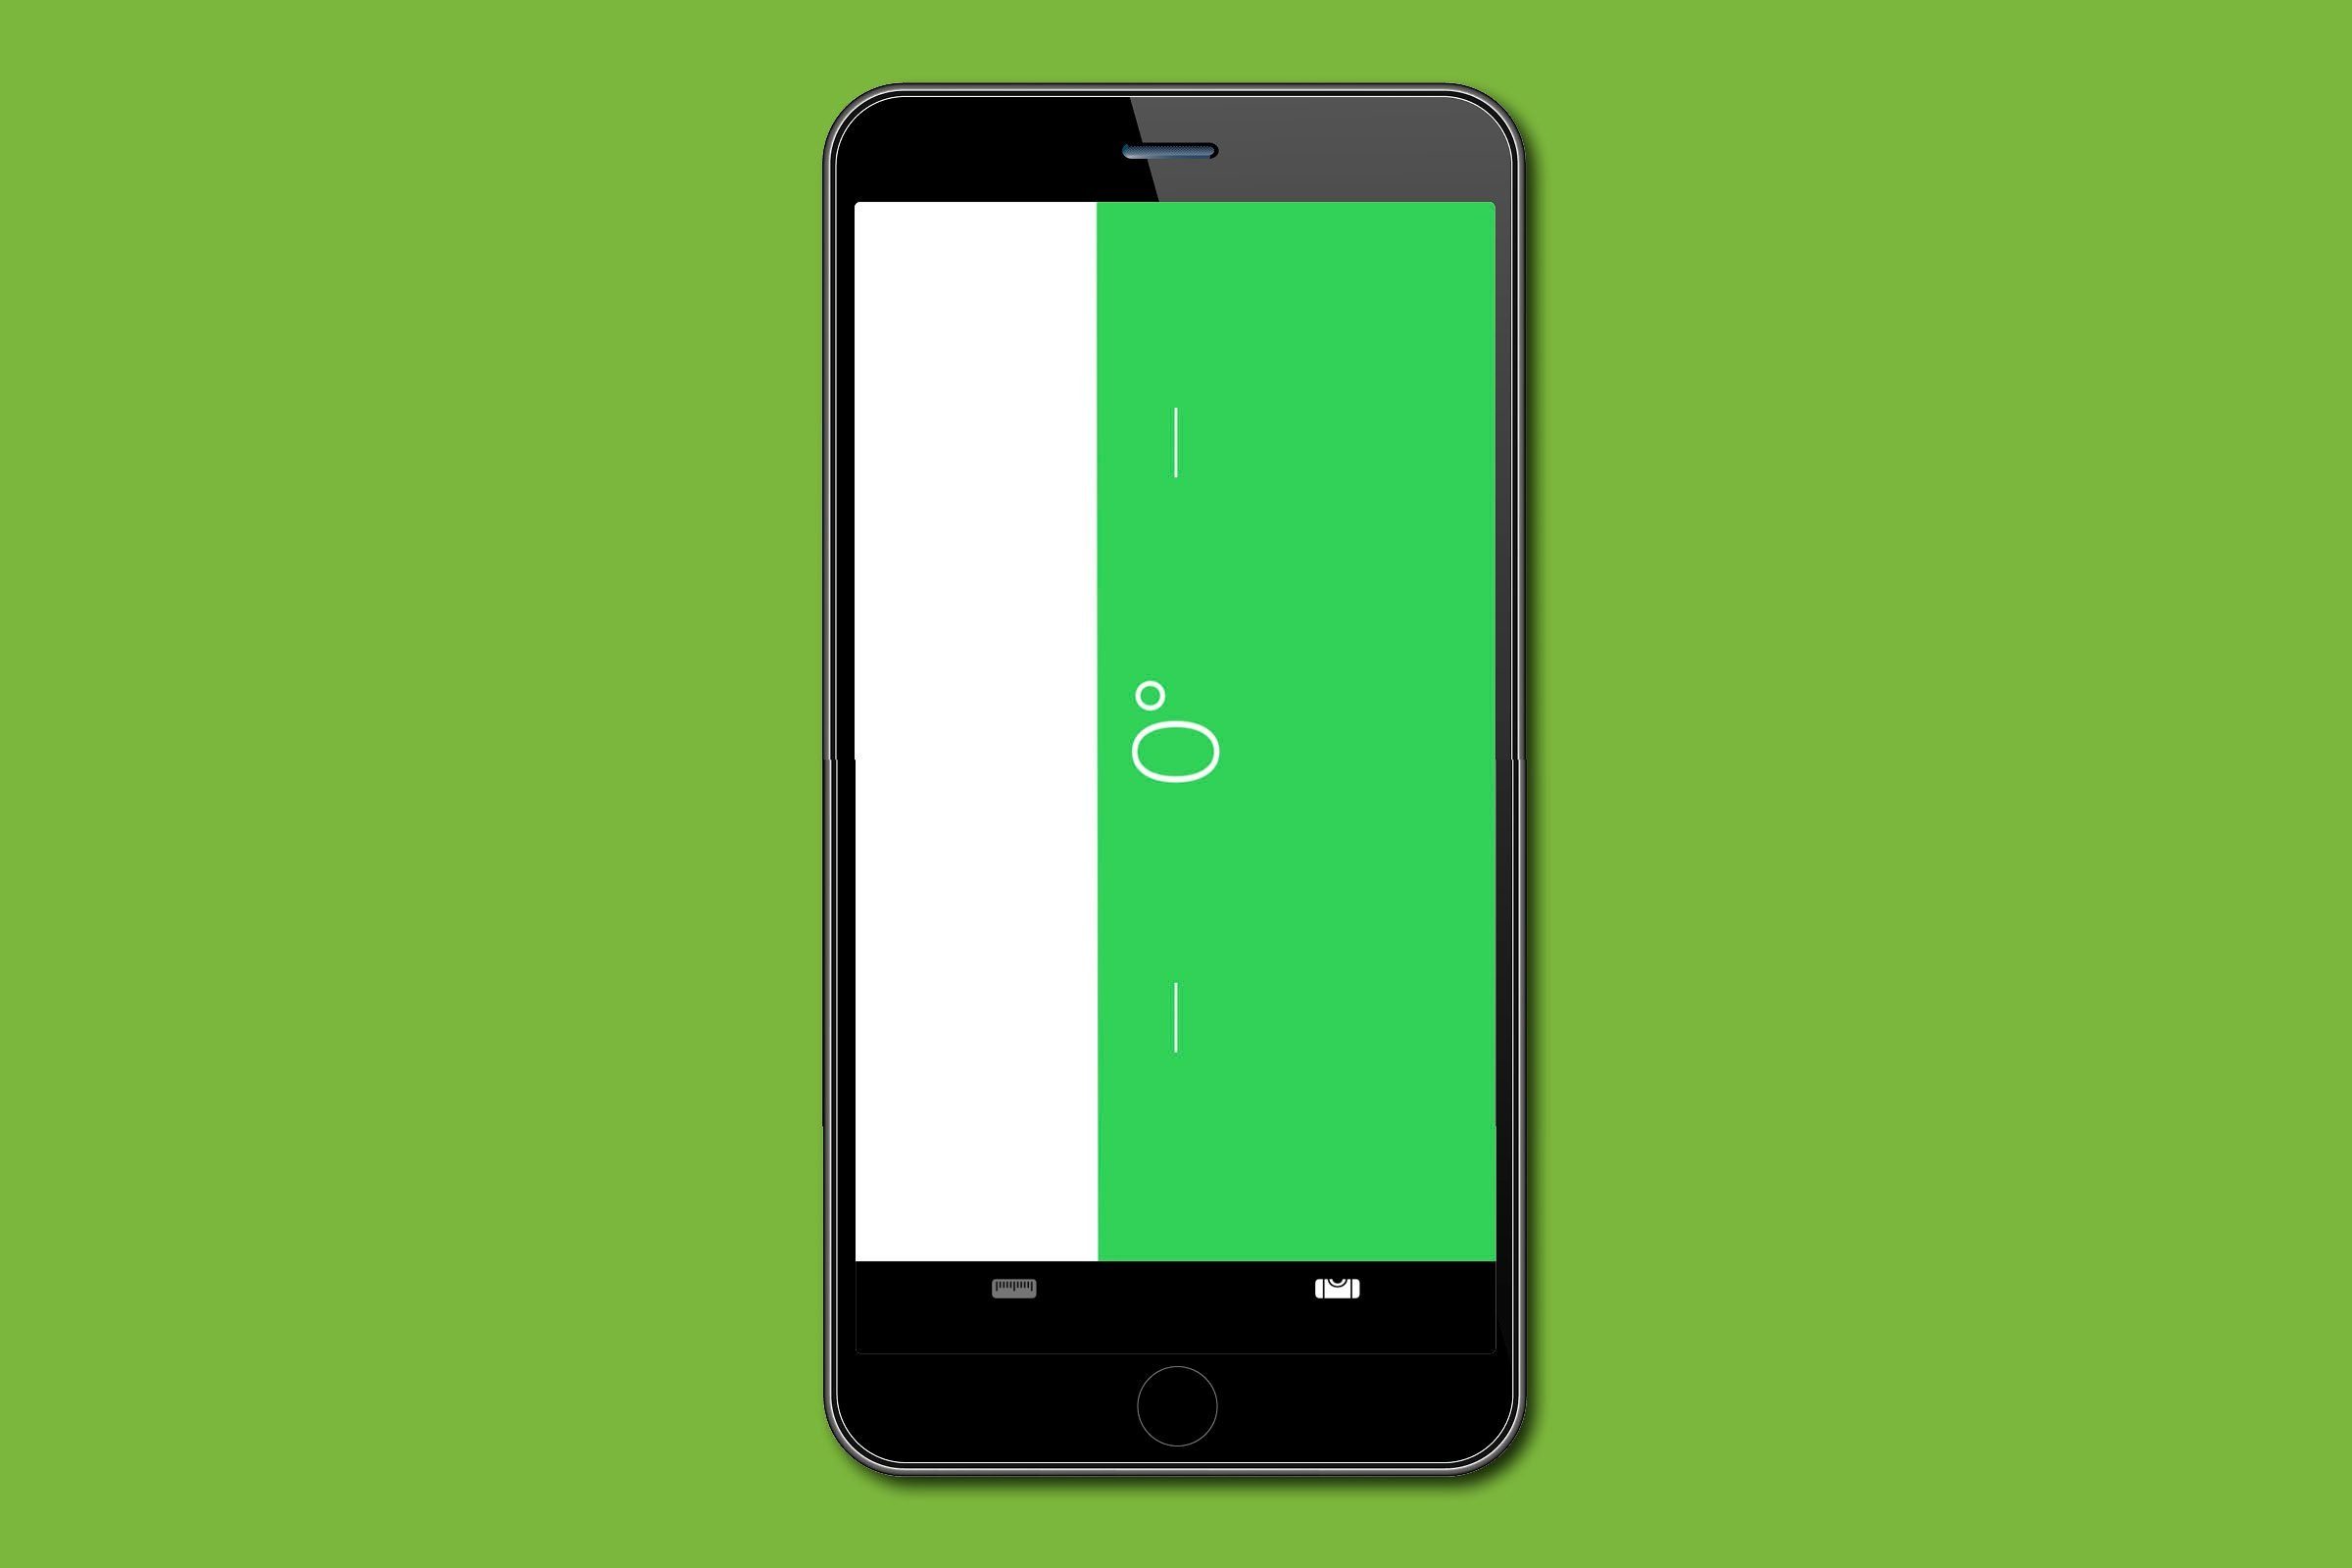 Use your iPhone's Measure app as a spirit level